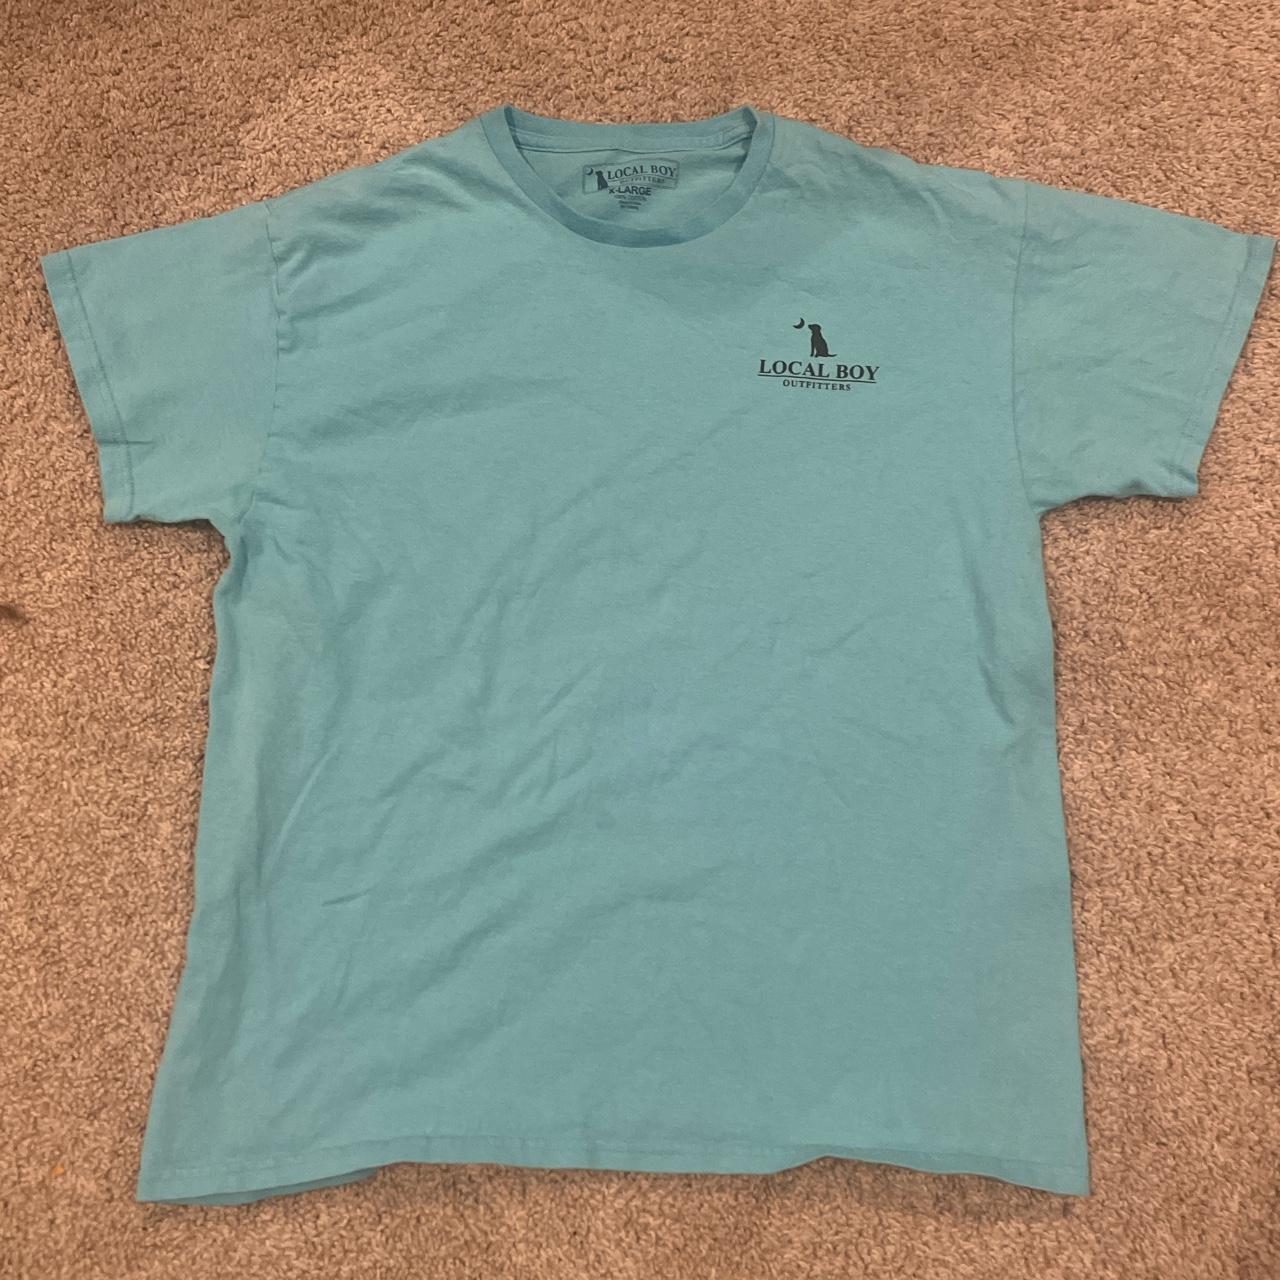 Youth XL Local Boy Outfitters t-shirt - Depop